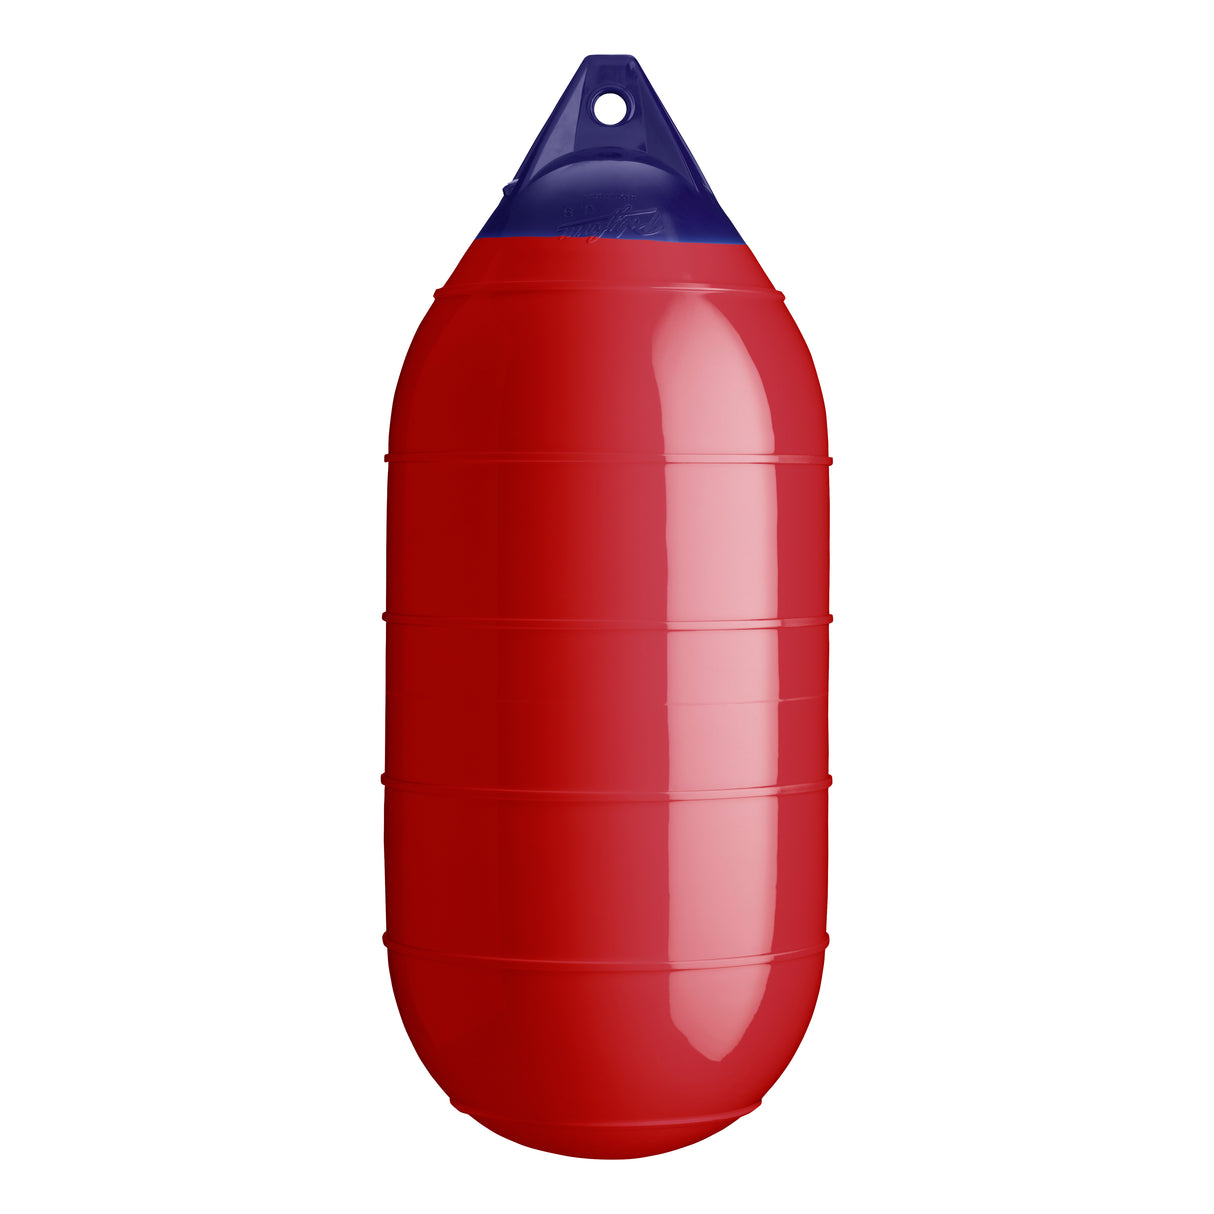 Classic Red inflatable low drag buoy, Polyform LD-4 